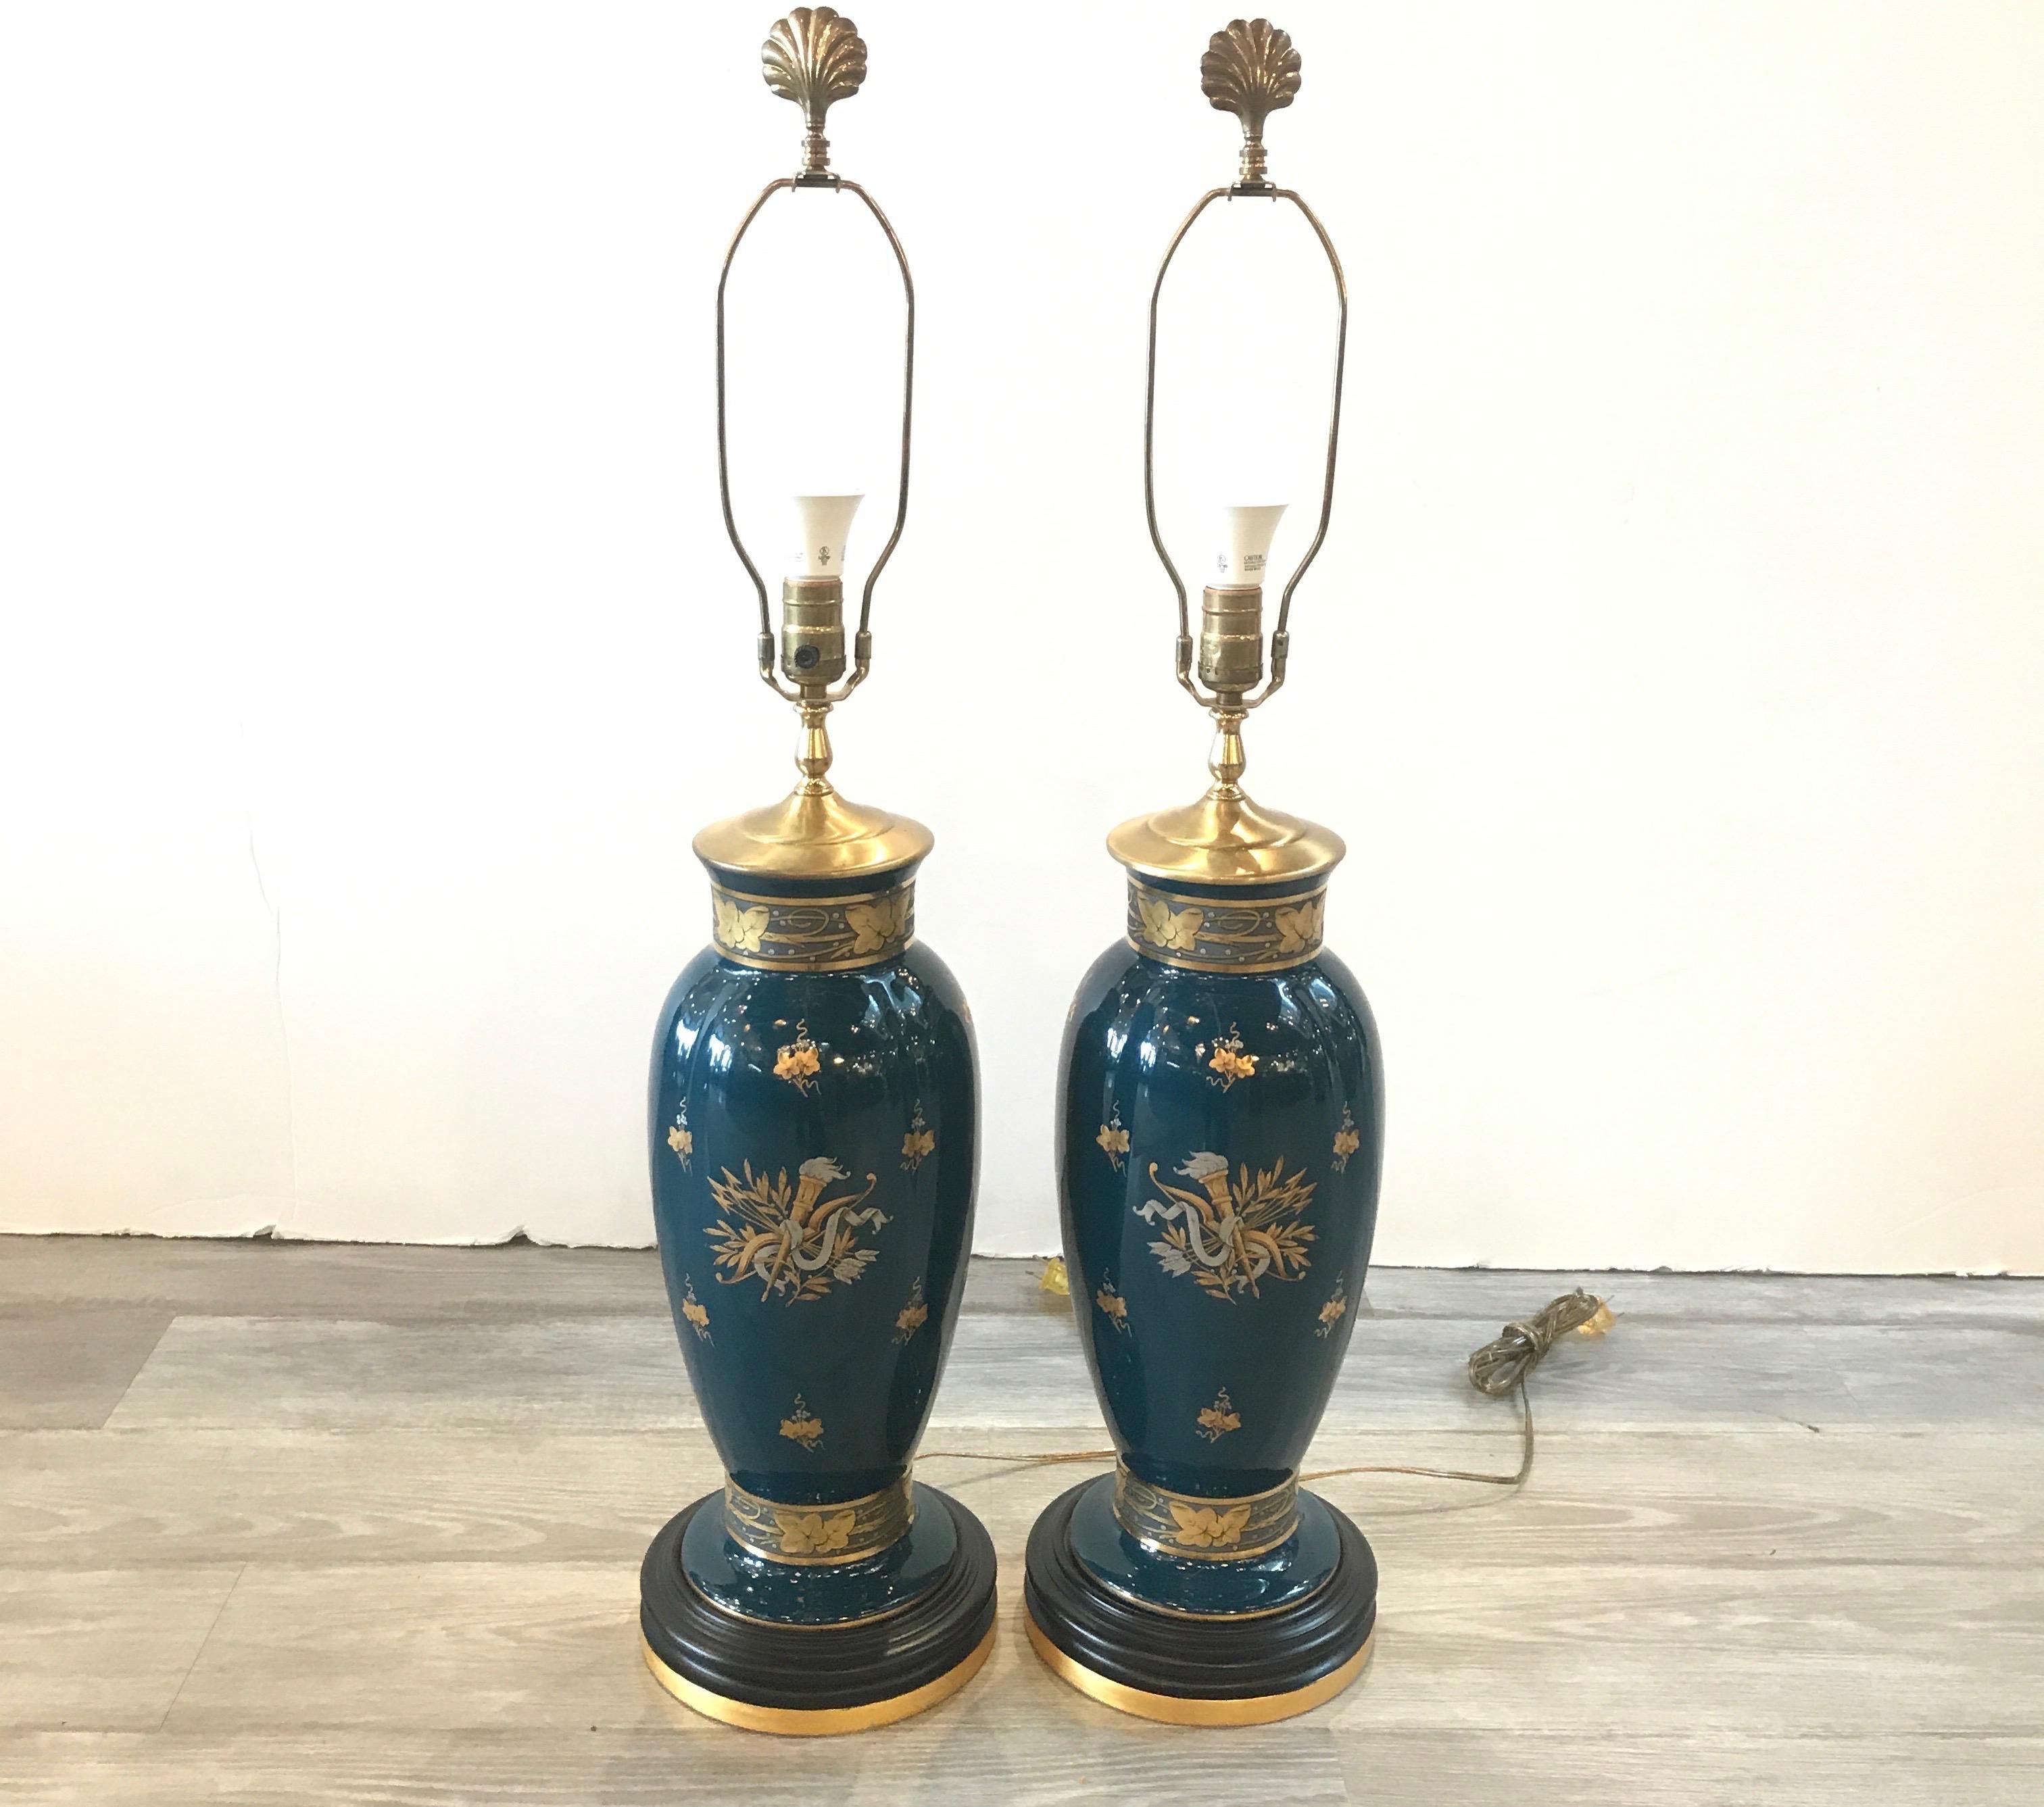 A pair of porcelain lamps in deep teal with silver and gilt decoration the vase form with a black and cold base. The wiring is modern and safe. The shades are for photographic purposes and not included. 33 inches to the top of the shade, 22 inches